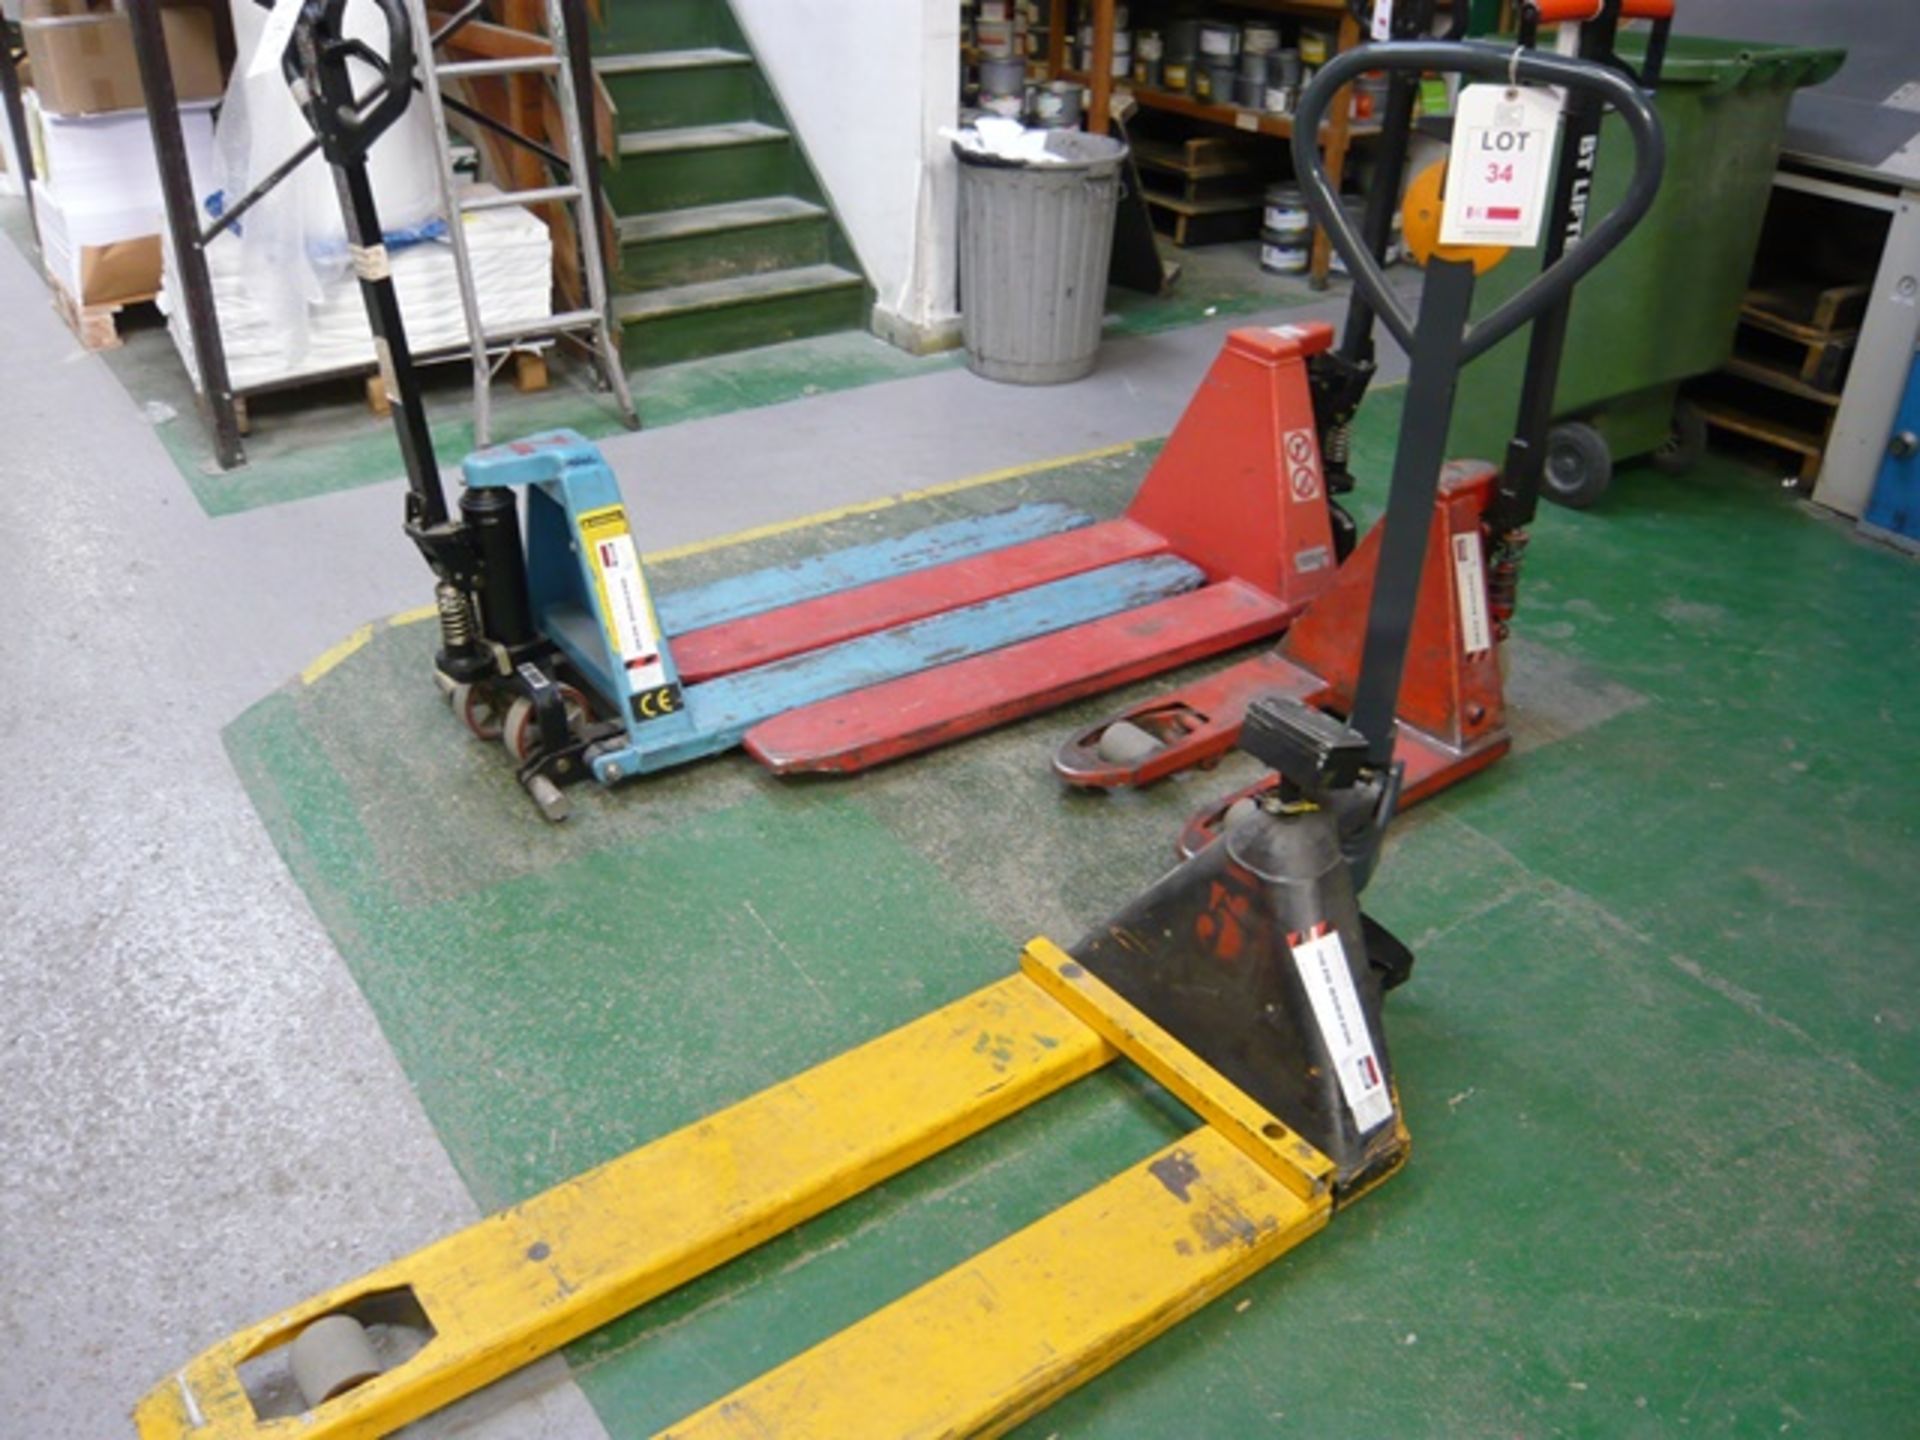 Pallet truck with electronic scale readout